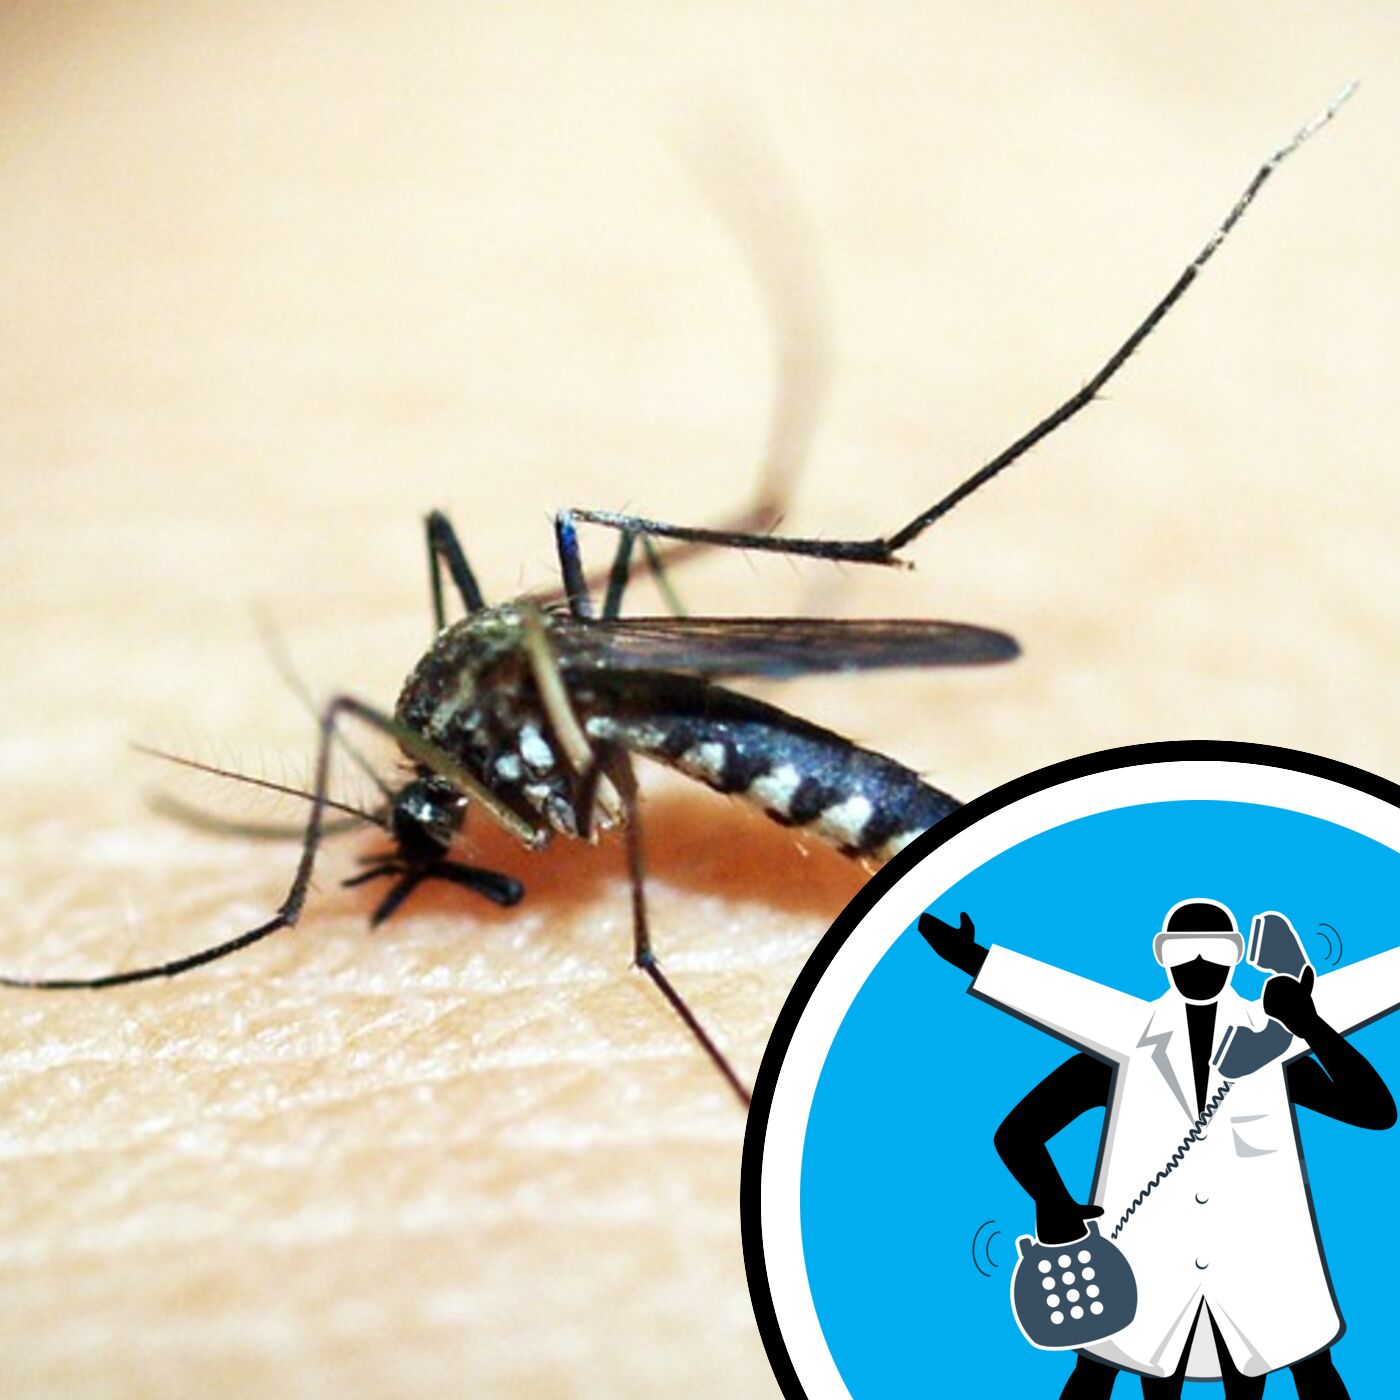 Do mosquitoes prefer certain people?